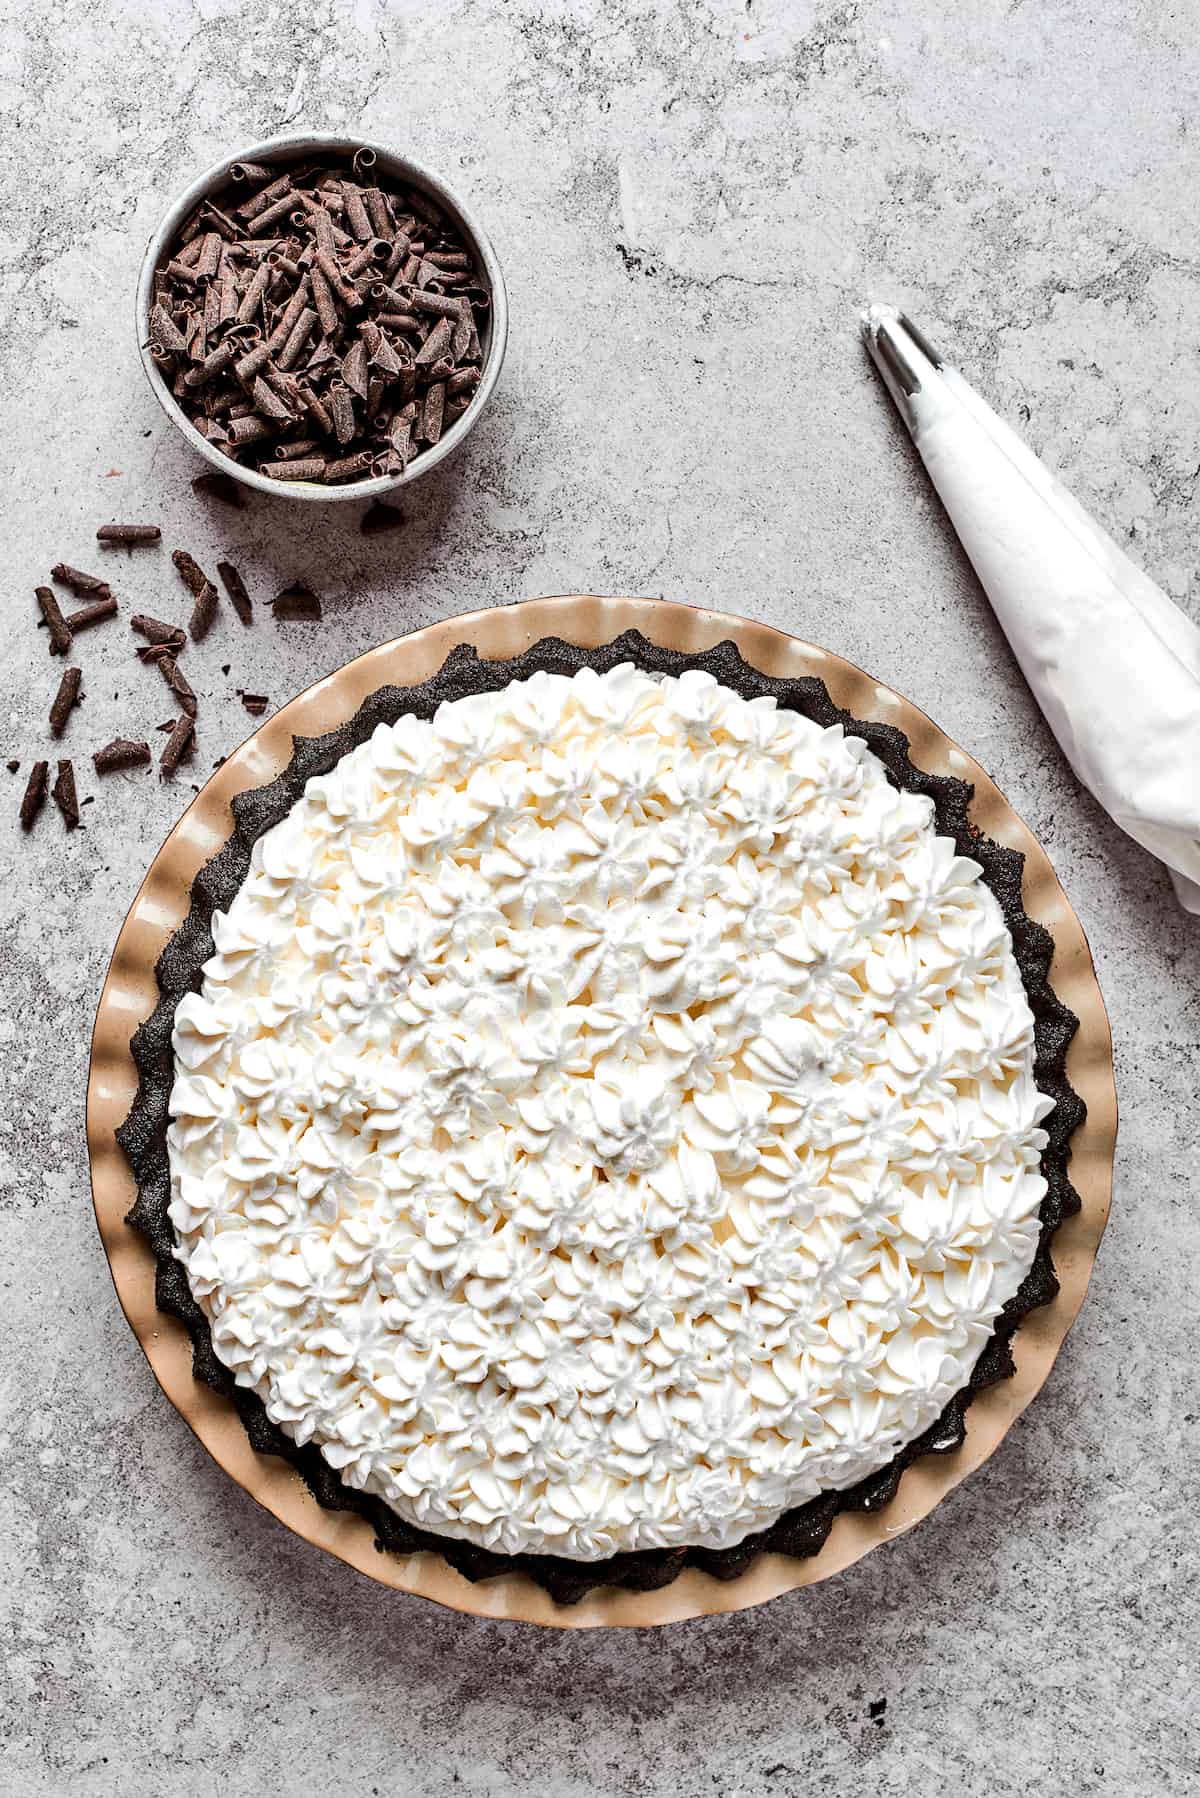 Whipped cream is piped on top of a French silk pie.